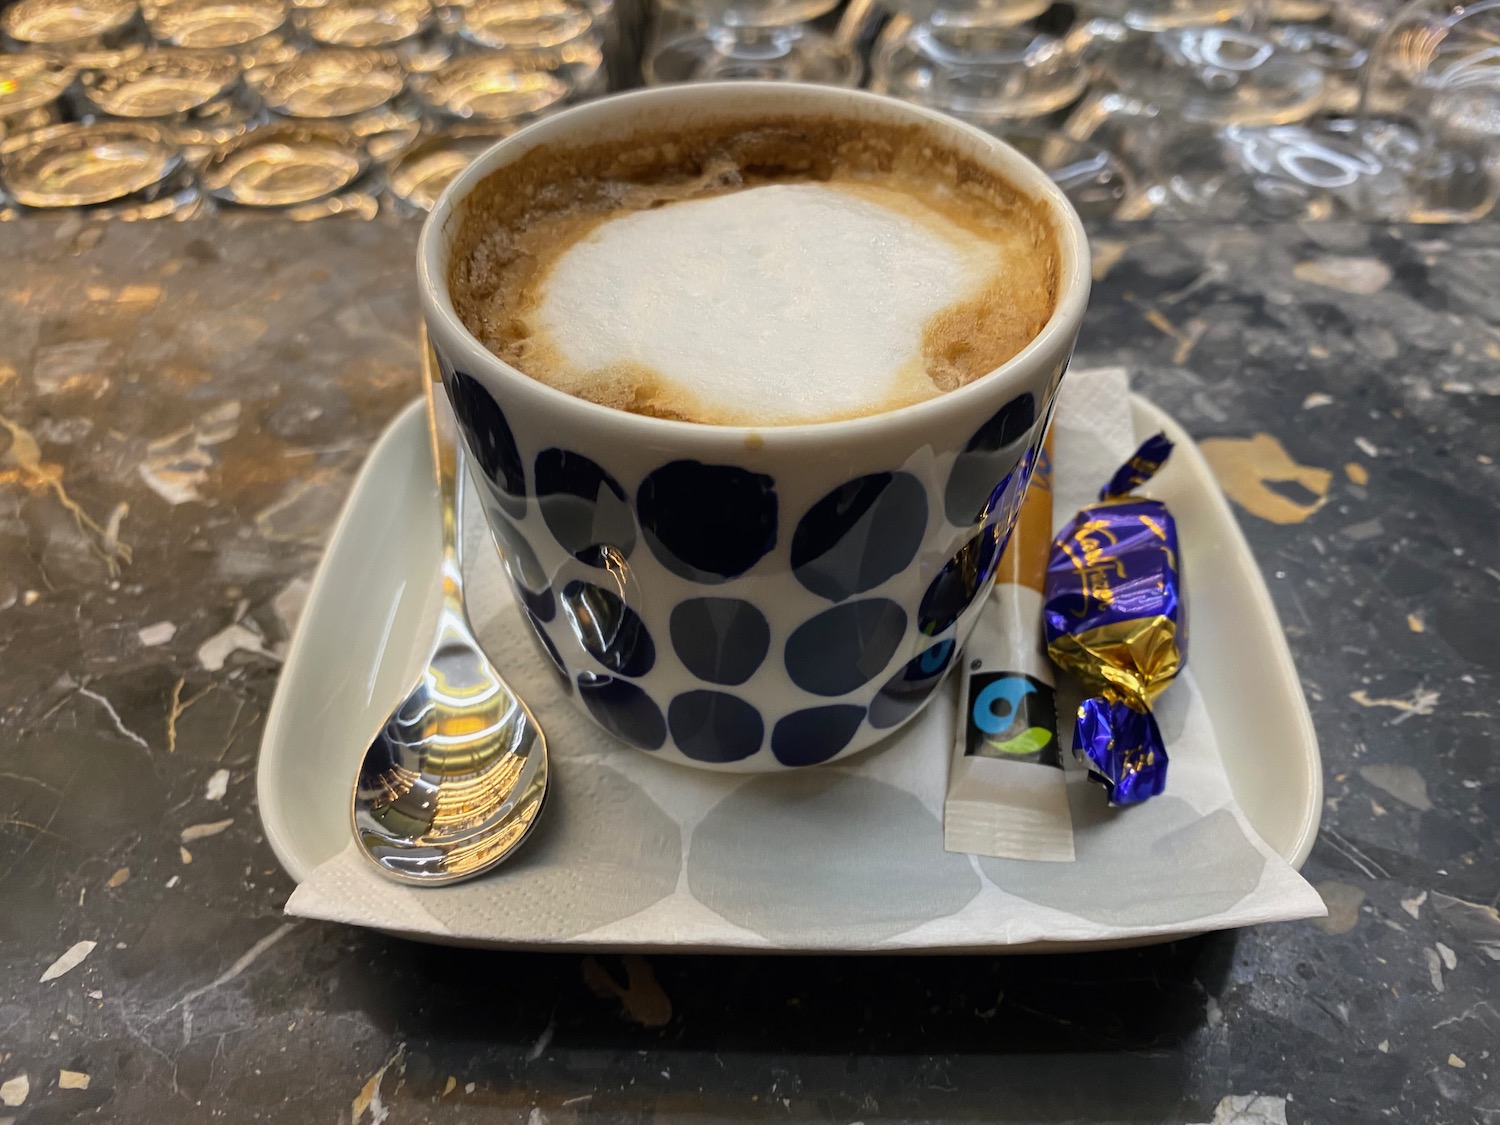 a cup of coffee with a spoon and candy on a plate